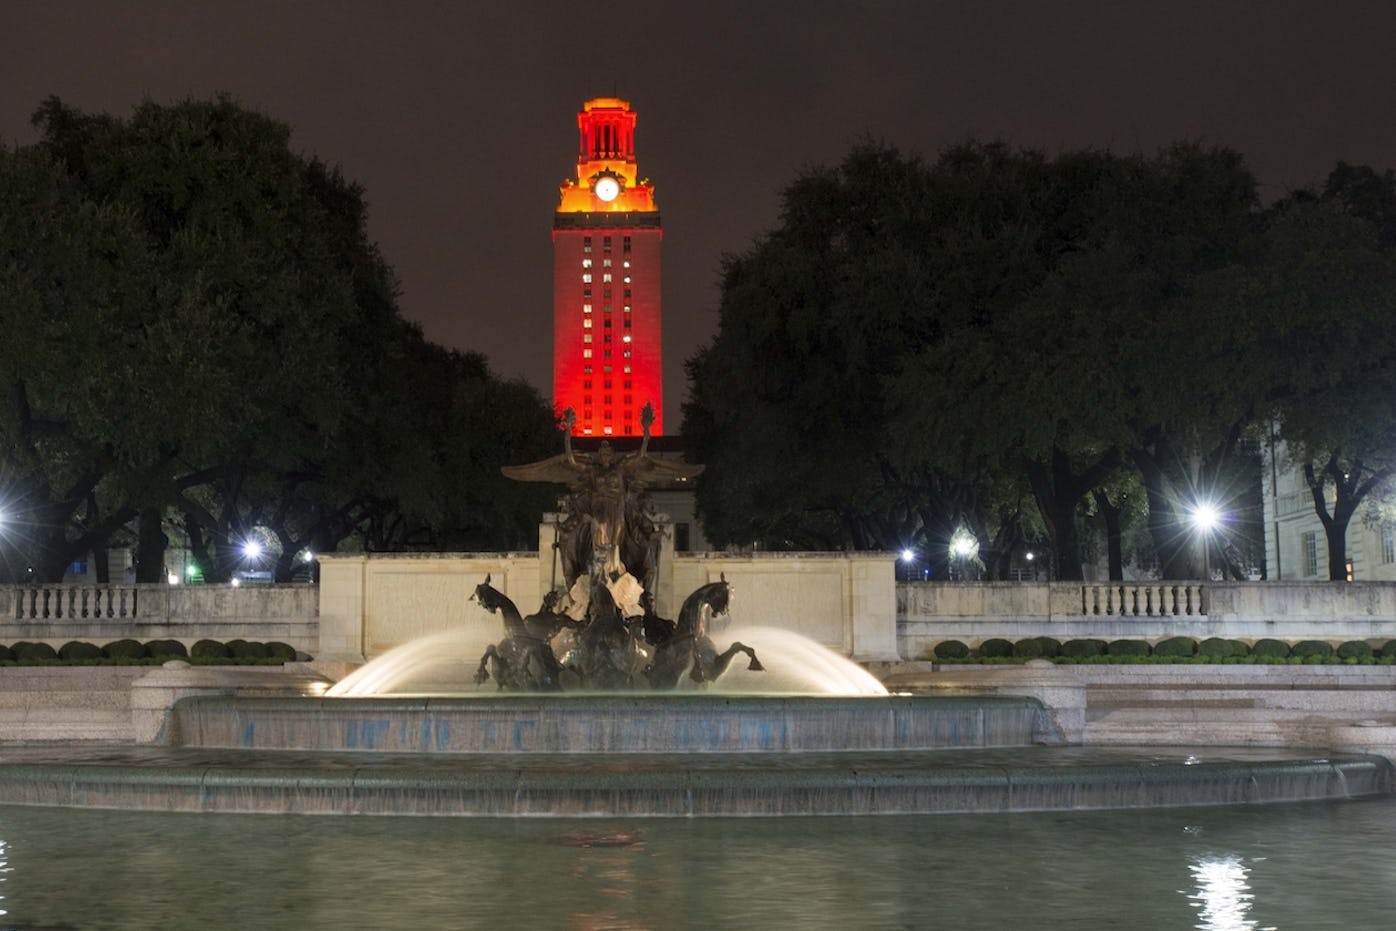 Night photo of the Little Field Fountain, a water feature with rearing horses in center of a round body of water the foreground and in the background the UT Tower lit with Orange lights